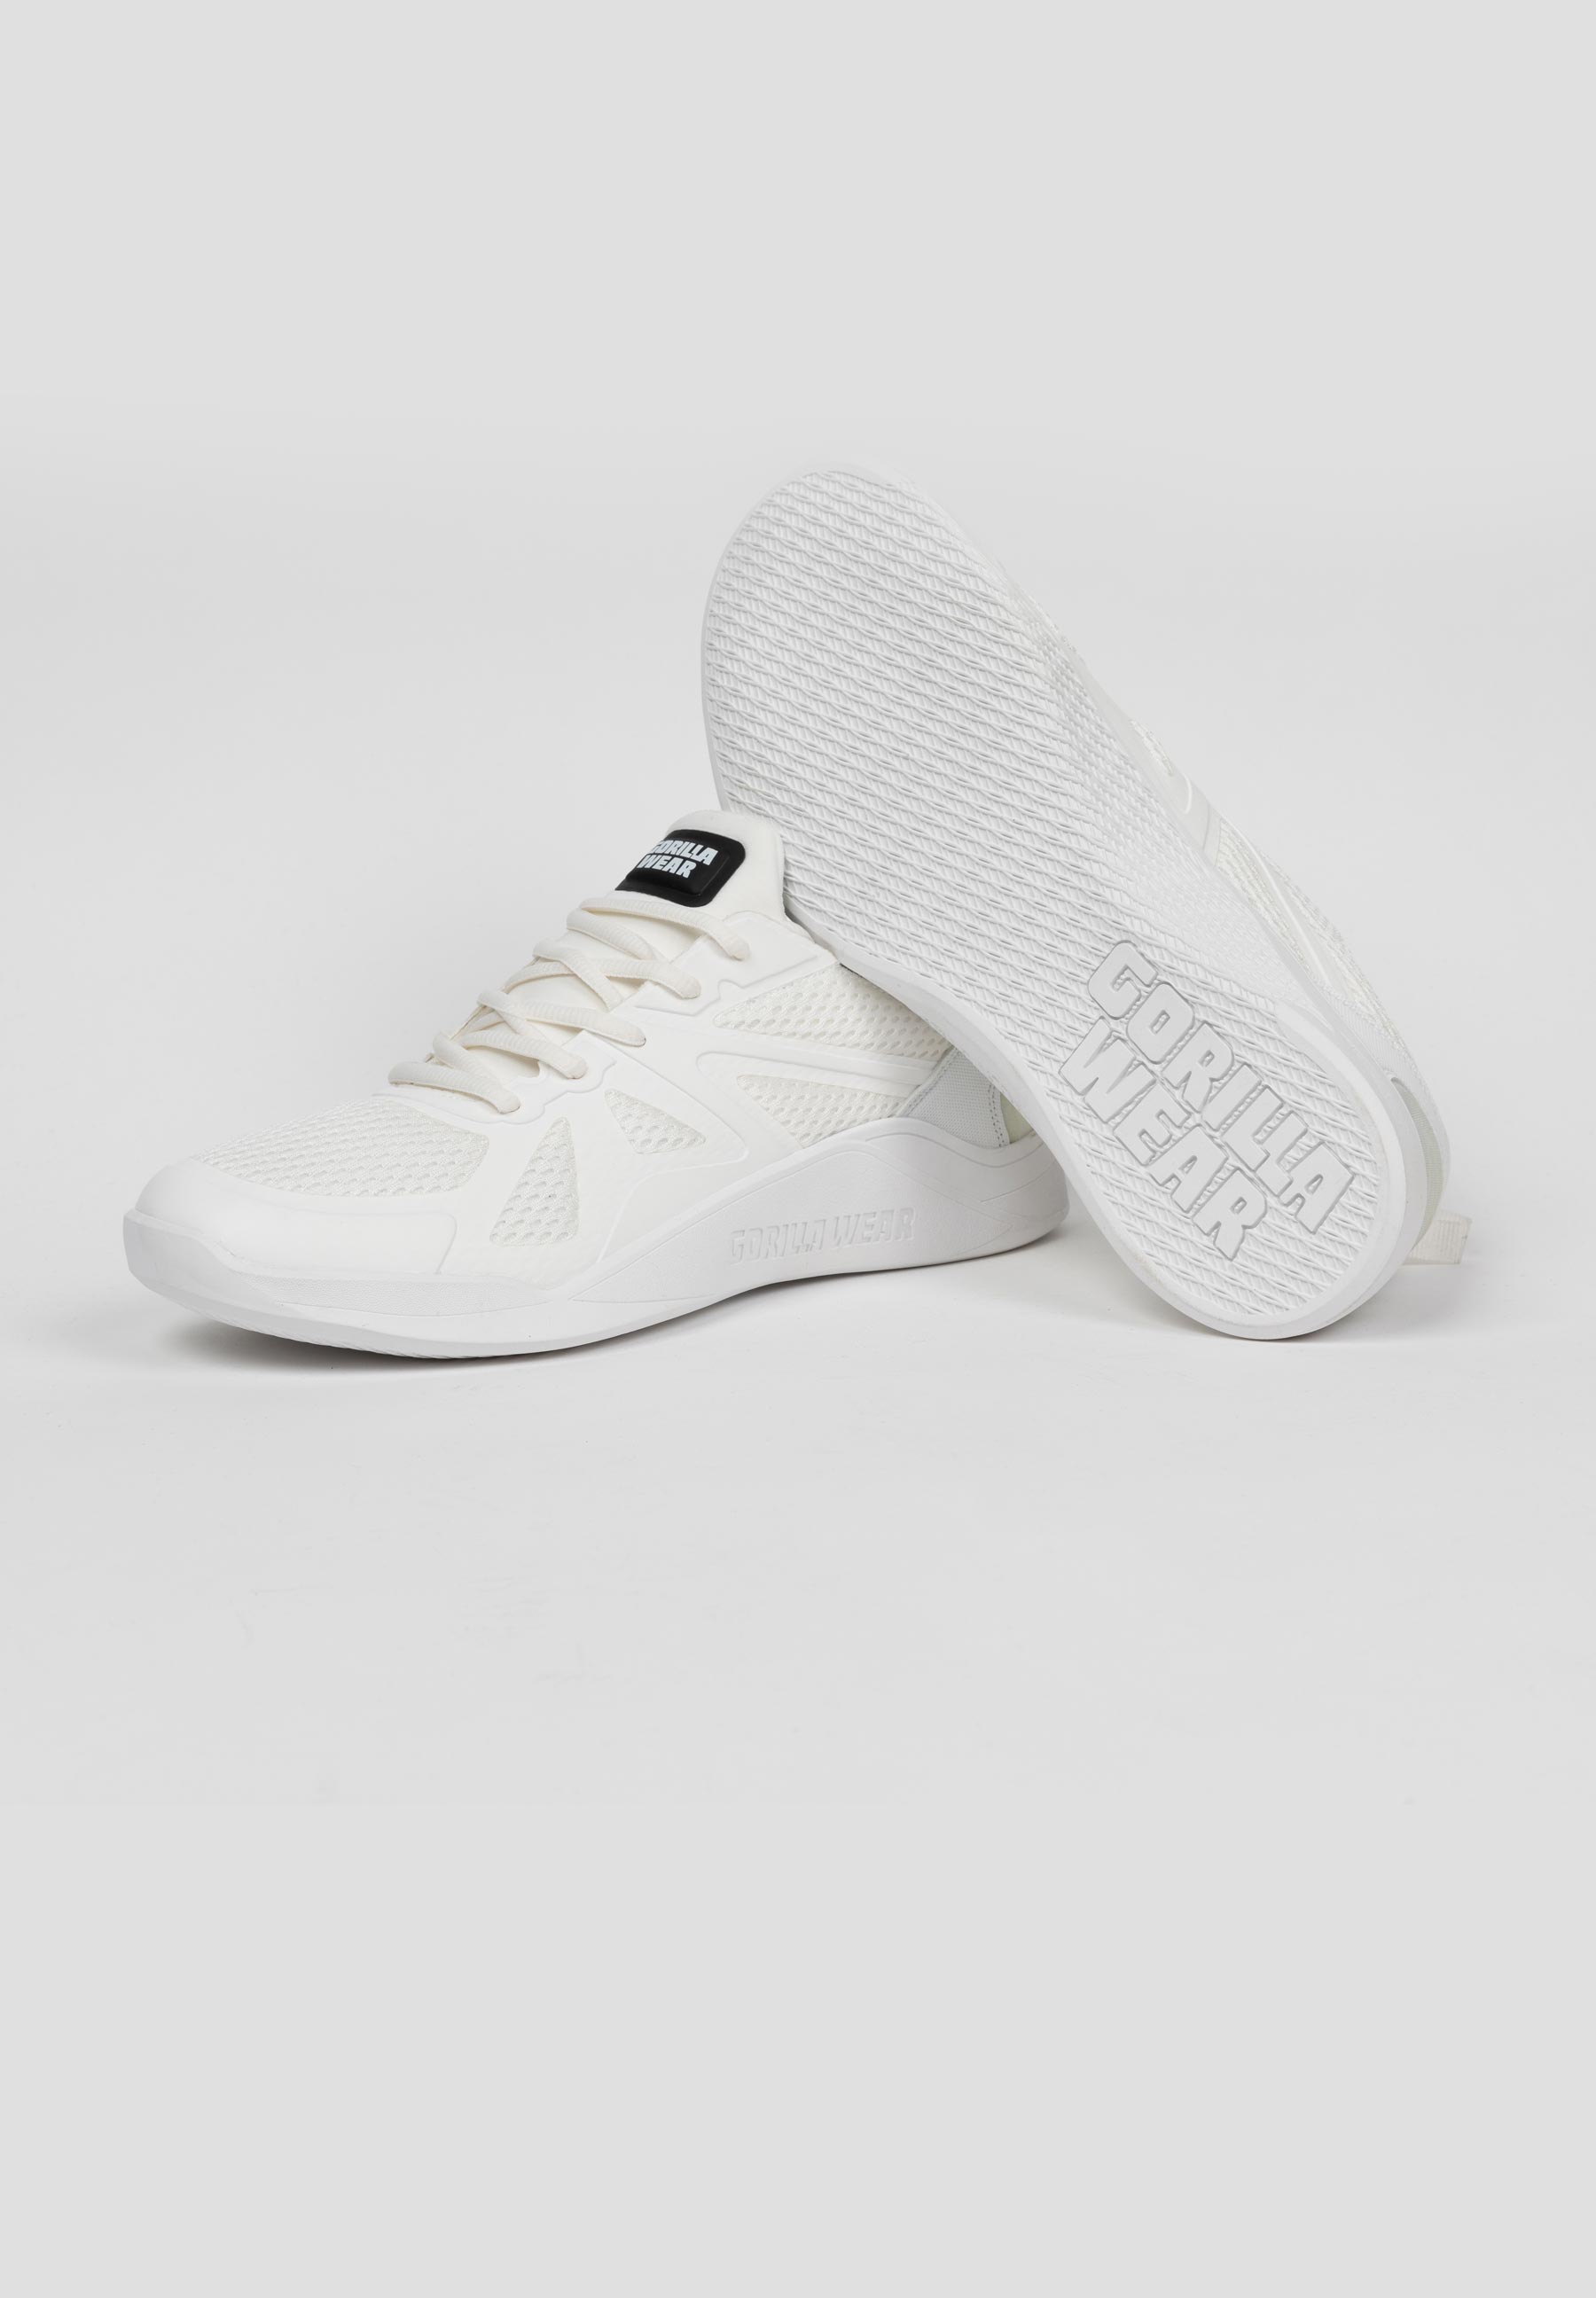 Gorilla Wear High Tops- White - The REP STORES